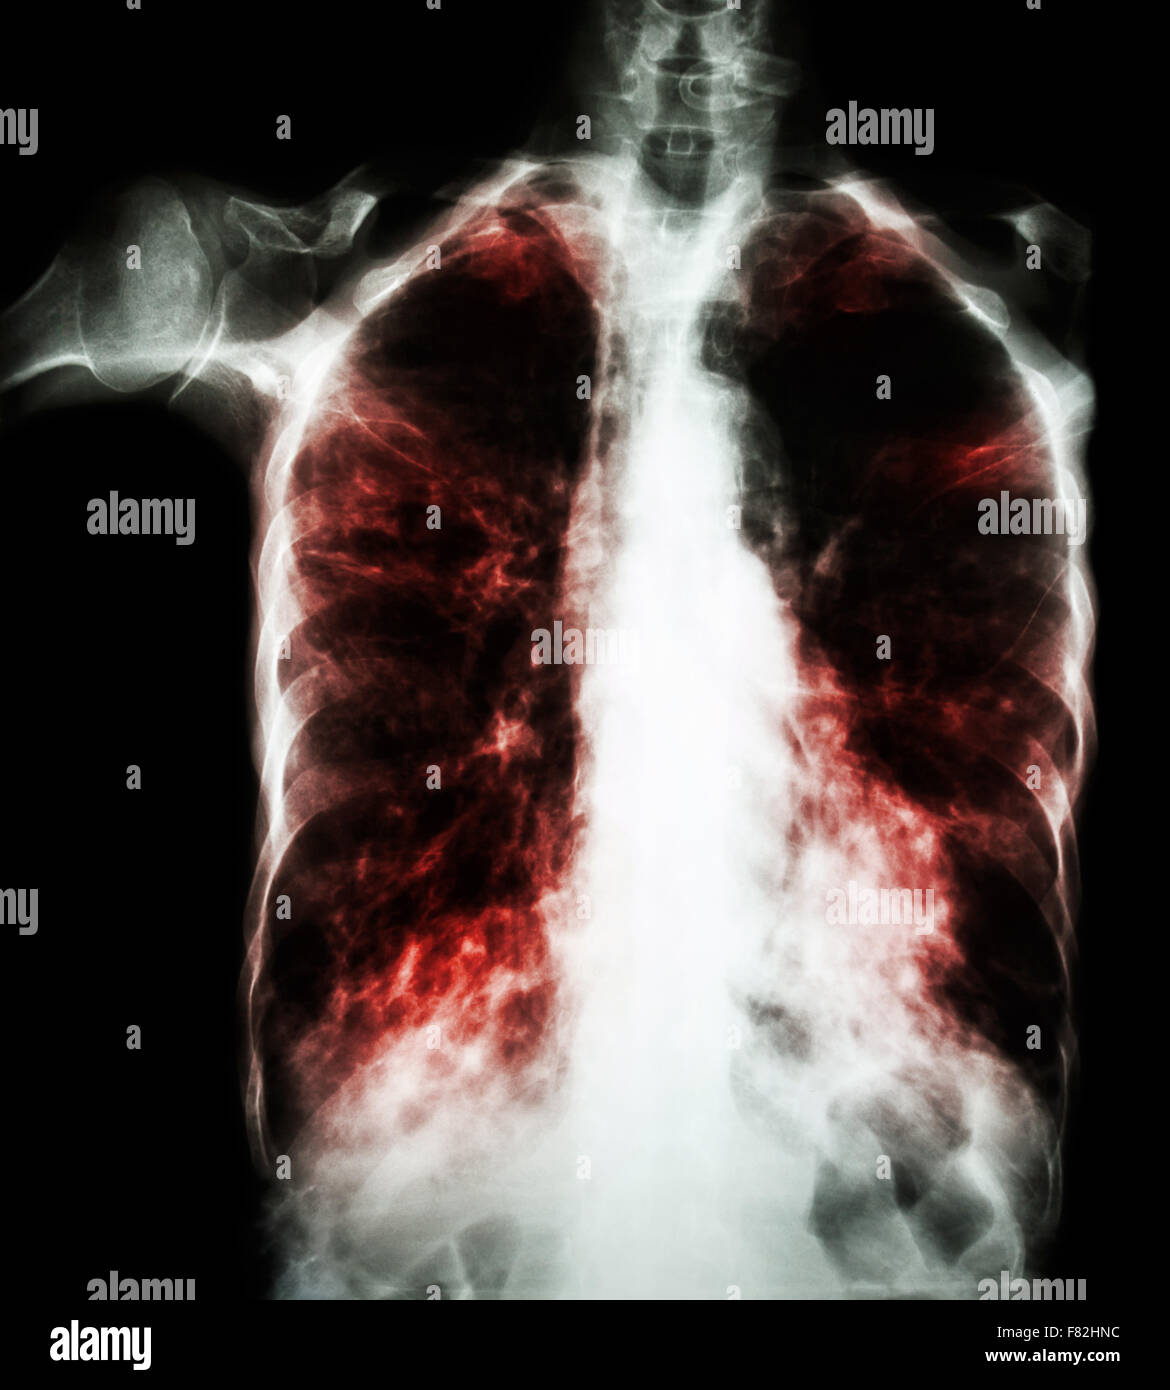 Pulmonary Tuberculosis ( film chest x-ray : interstitial infiltrate